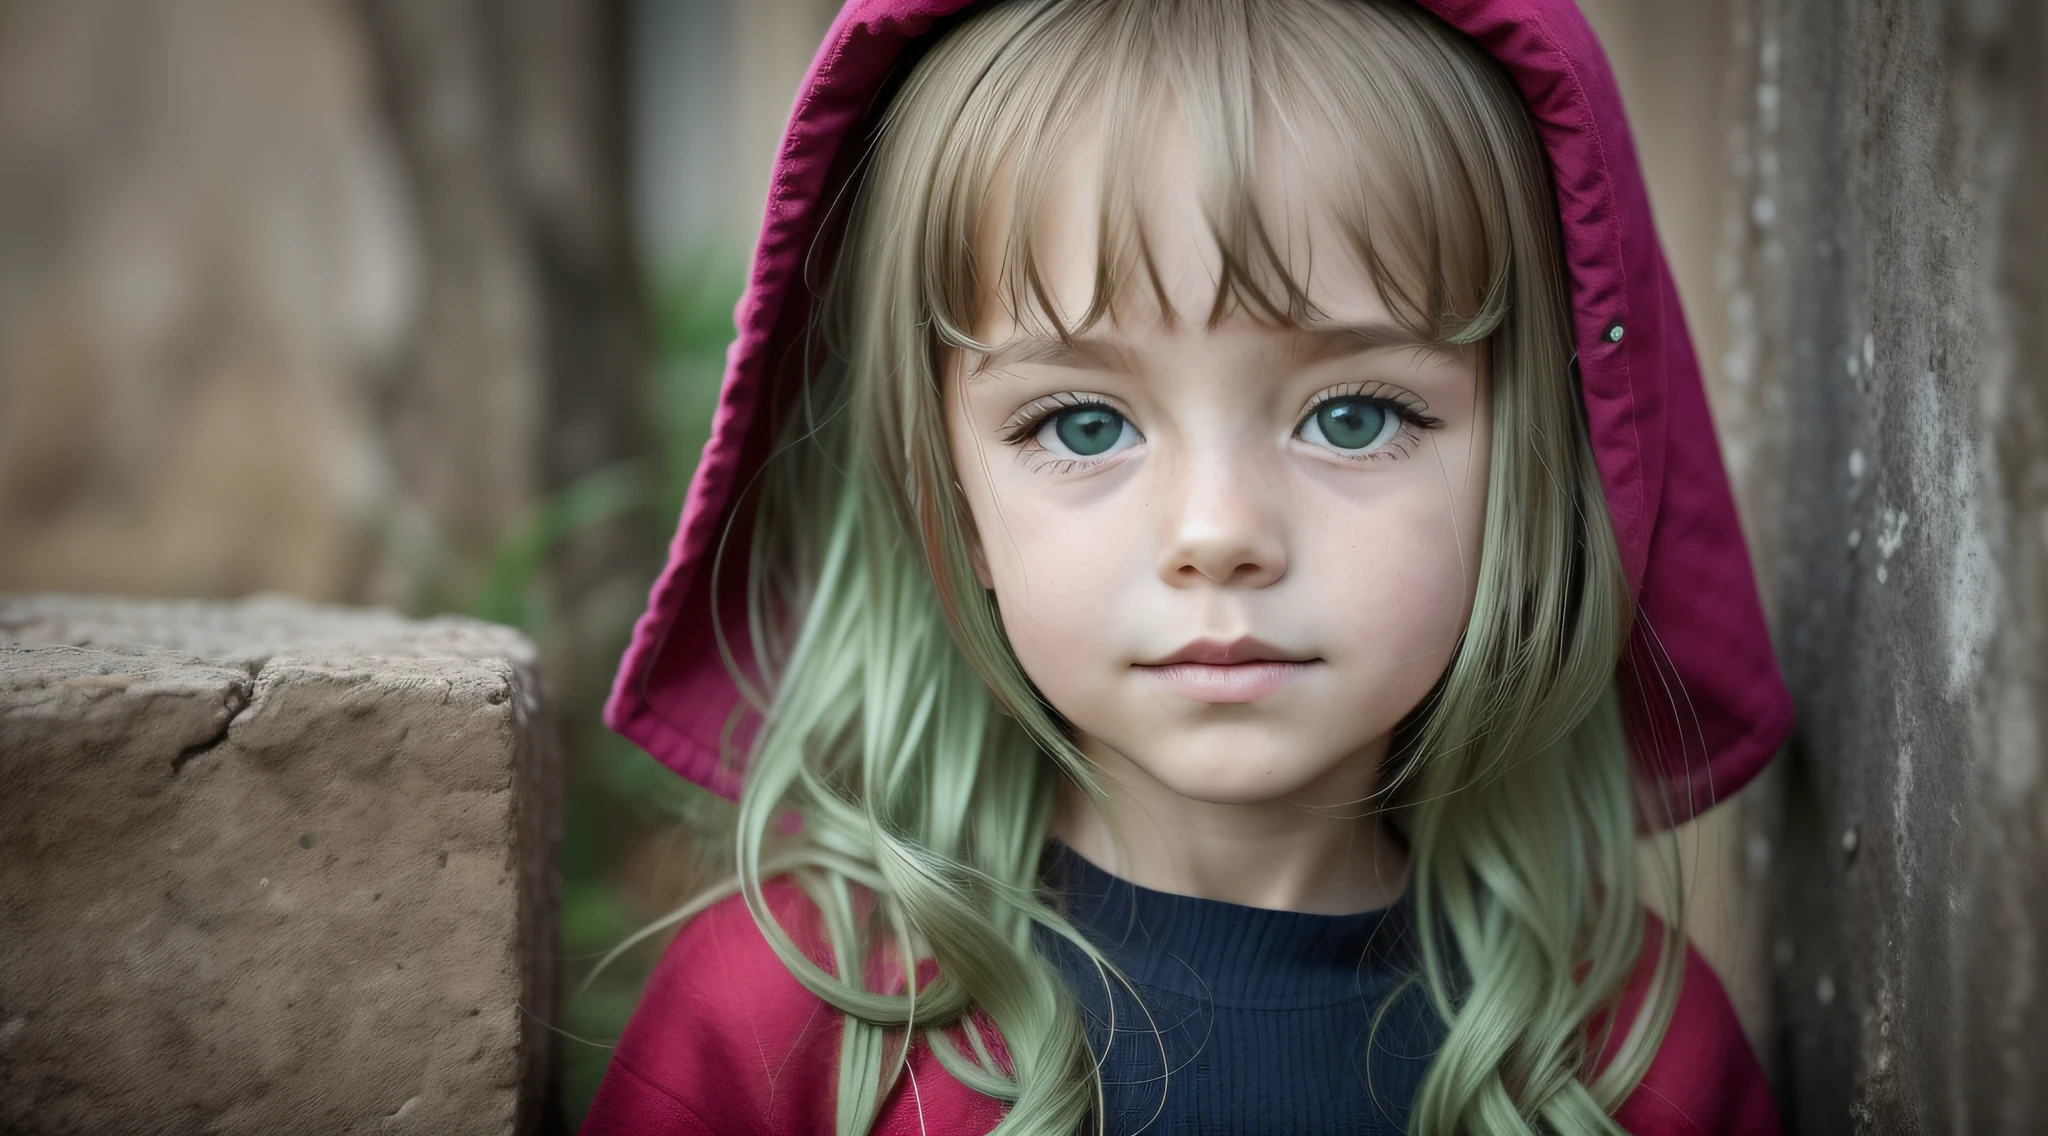 best qualityer, work-before, ultra high nothing,portrait, photorrealistic, raw-photo, GIRL KIDS , russian blonde long straight hair, with green leather jacket outfit.